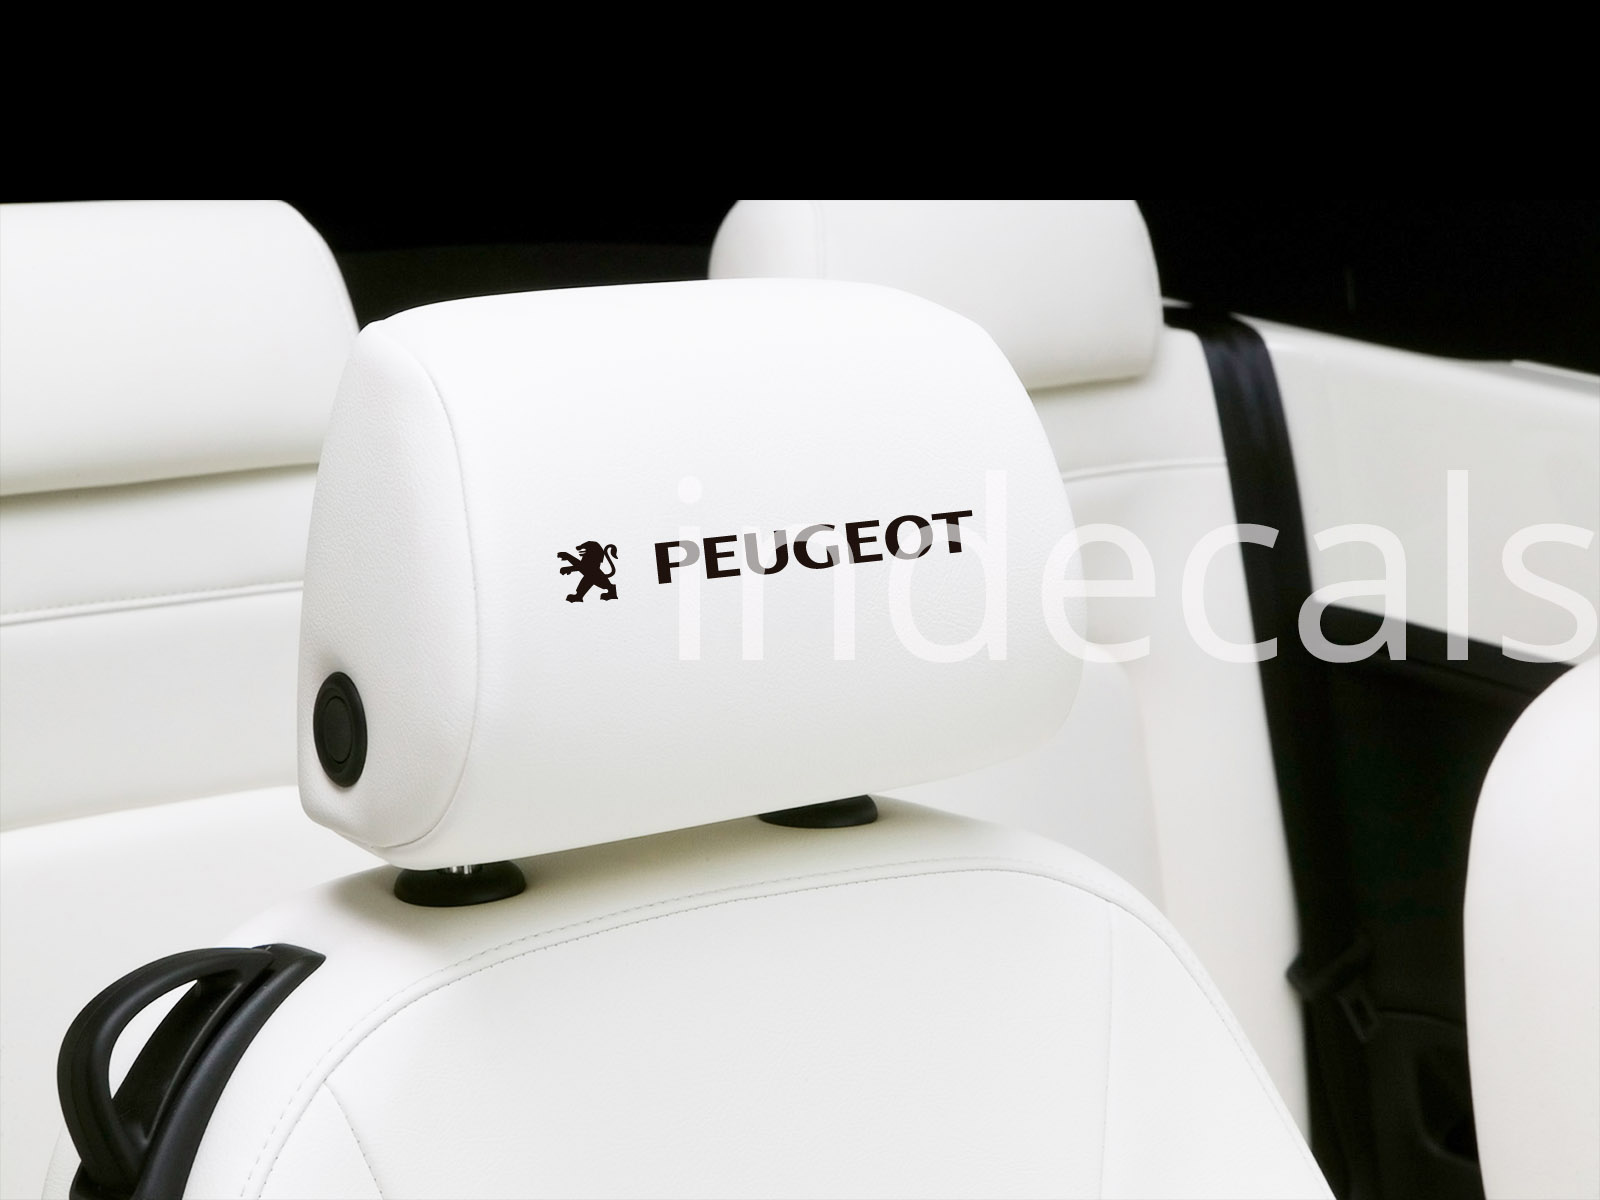 6 x Peugeot Stickers for Headrests - Black